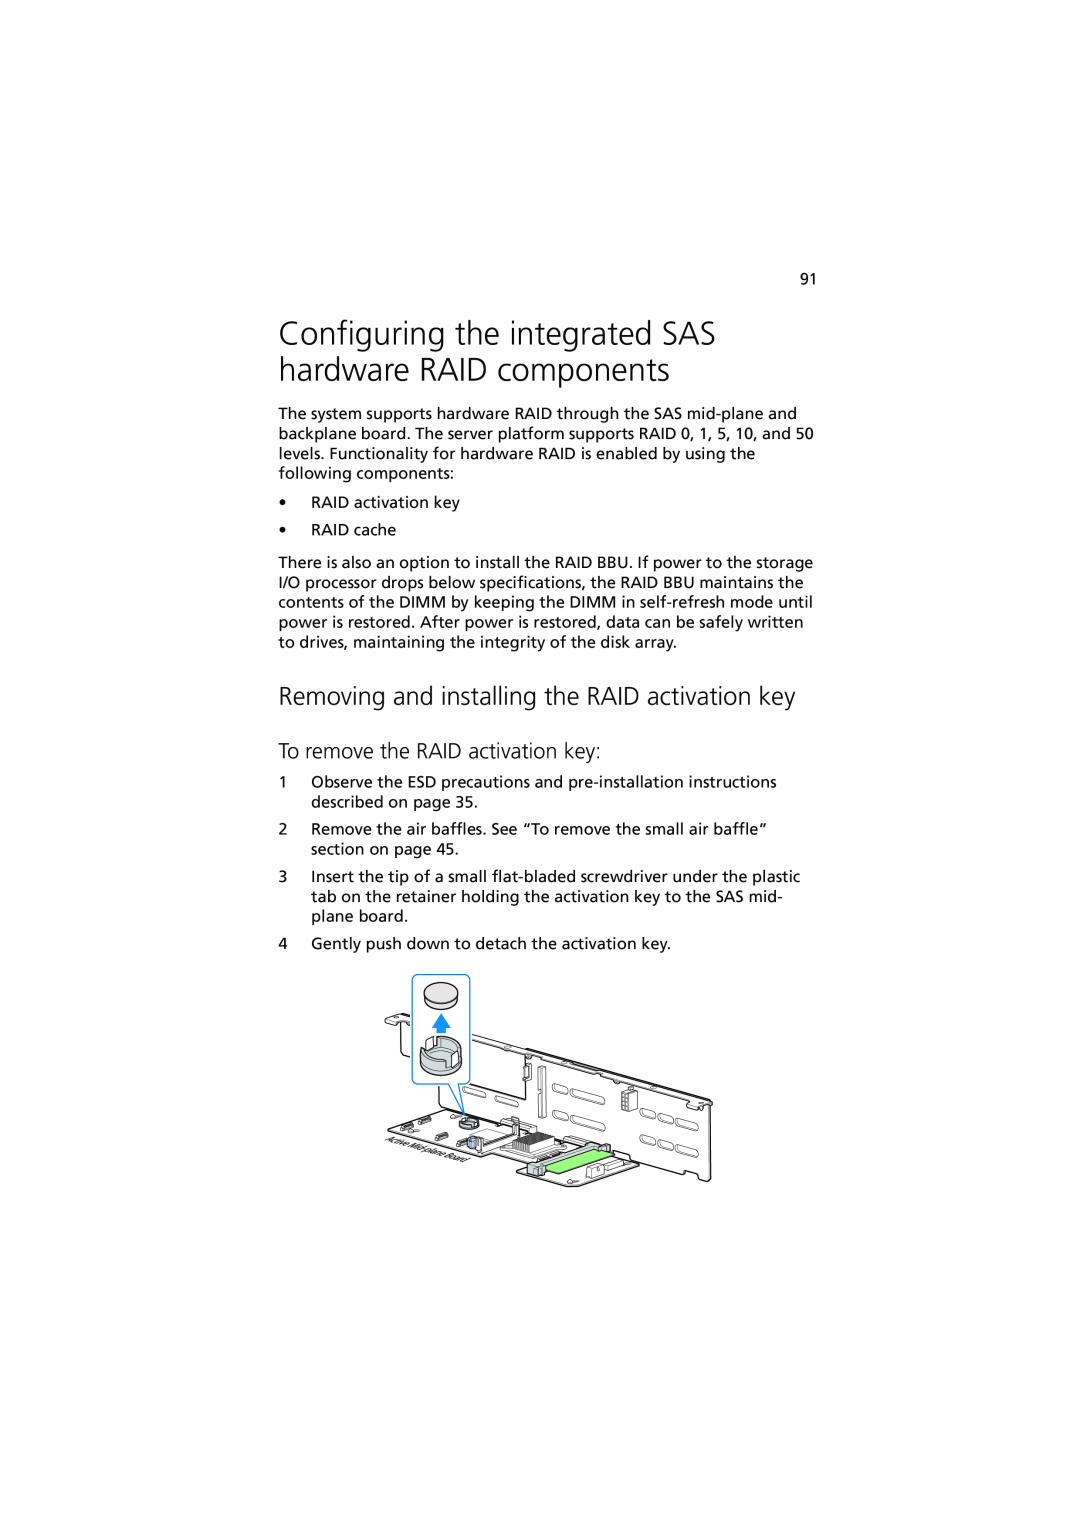 Acer R720 Series Configuring the integrated SAS hardware RAID components, Removing and installing the RAID activation key 